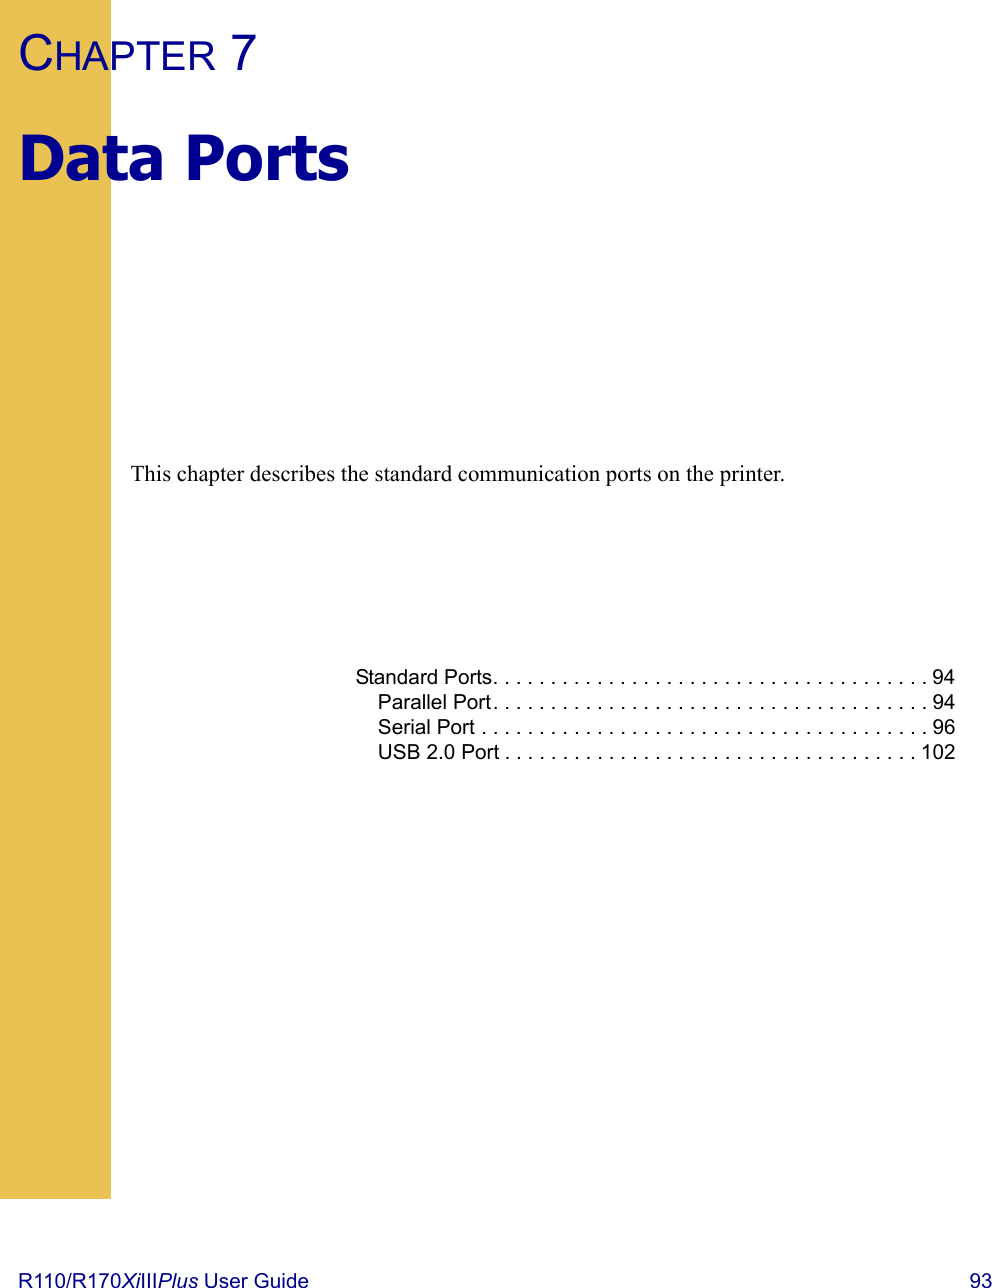 R110/R170XiIIIPlus User Guide  93CHAPTER 7Data PortsThis chapter describes the standard communication ports on the printer.Standard Ports. . . . . . . . . . . . . . . . . . . . . . . . . . . . . . . . . . . . . . 94Parallel Port. . . . . . . . . . . . . . . . . . . . . . . . . . . . . . . . . . . . . . 94Serial Port . . . . . . . . . . . . . . . . . . . . . . . . . . . . . . . . . . . . . . . 96USB 2.0 Port . . . . . . . . . . . . . . . . . . . . . . . . . . . . . . . . . . . . 102